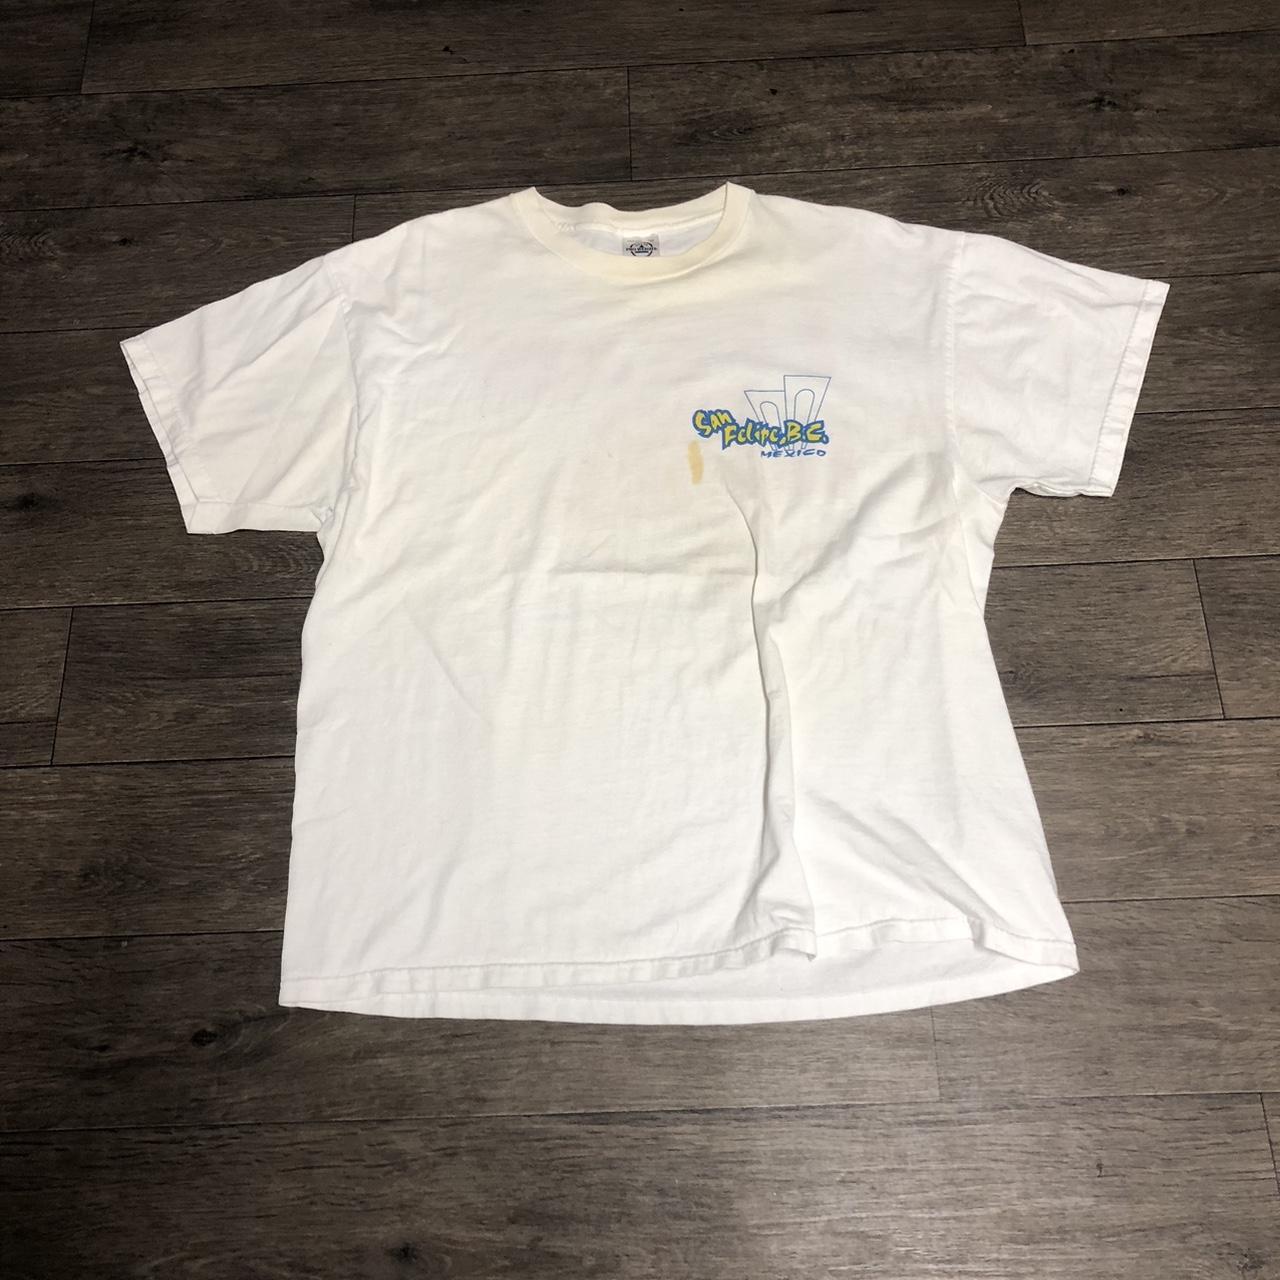 item listed by youngvtgdealer